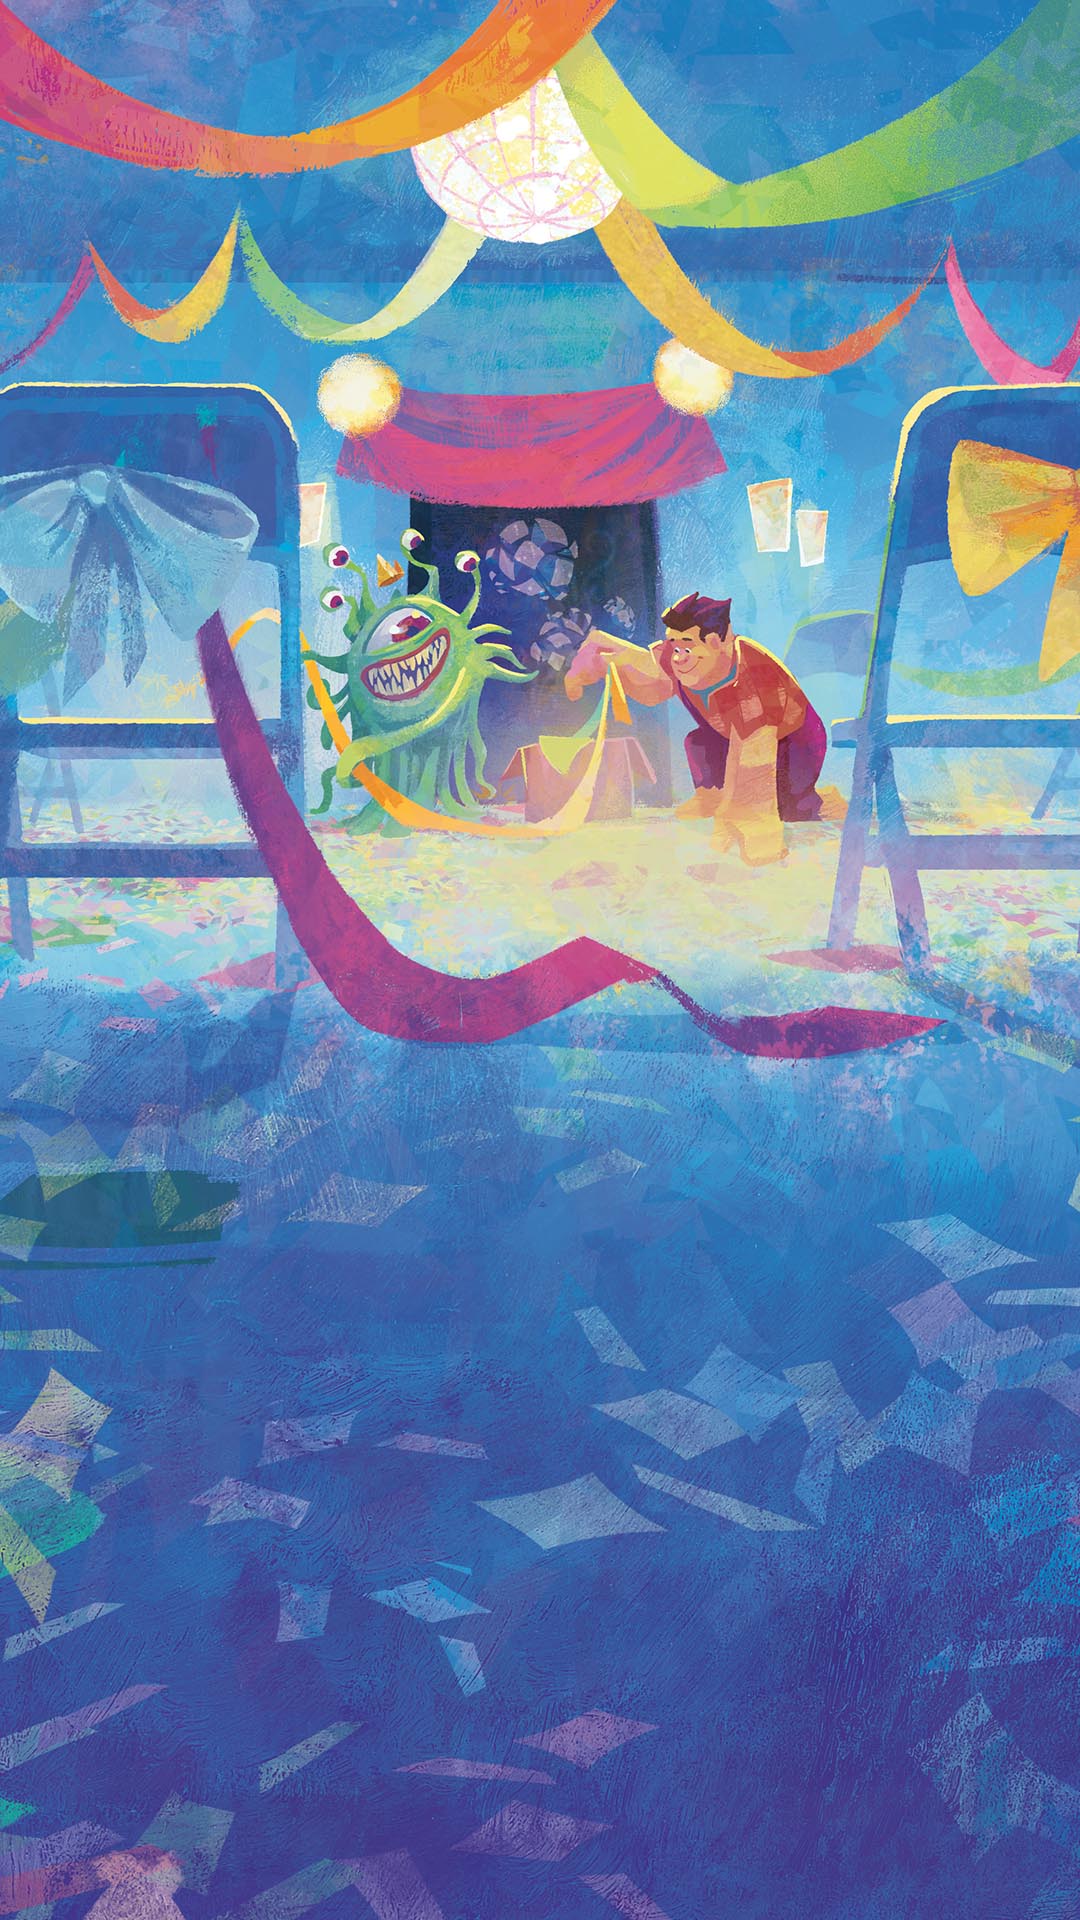 Decorative background image of Wreck-It Ralph cleaning up a celebration room